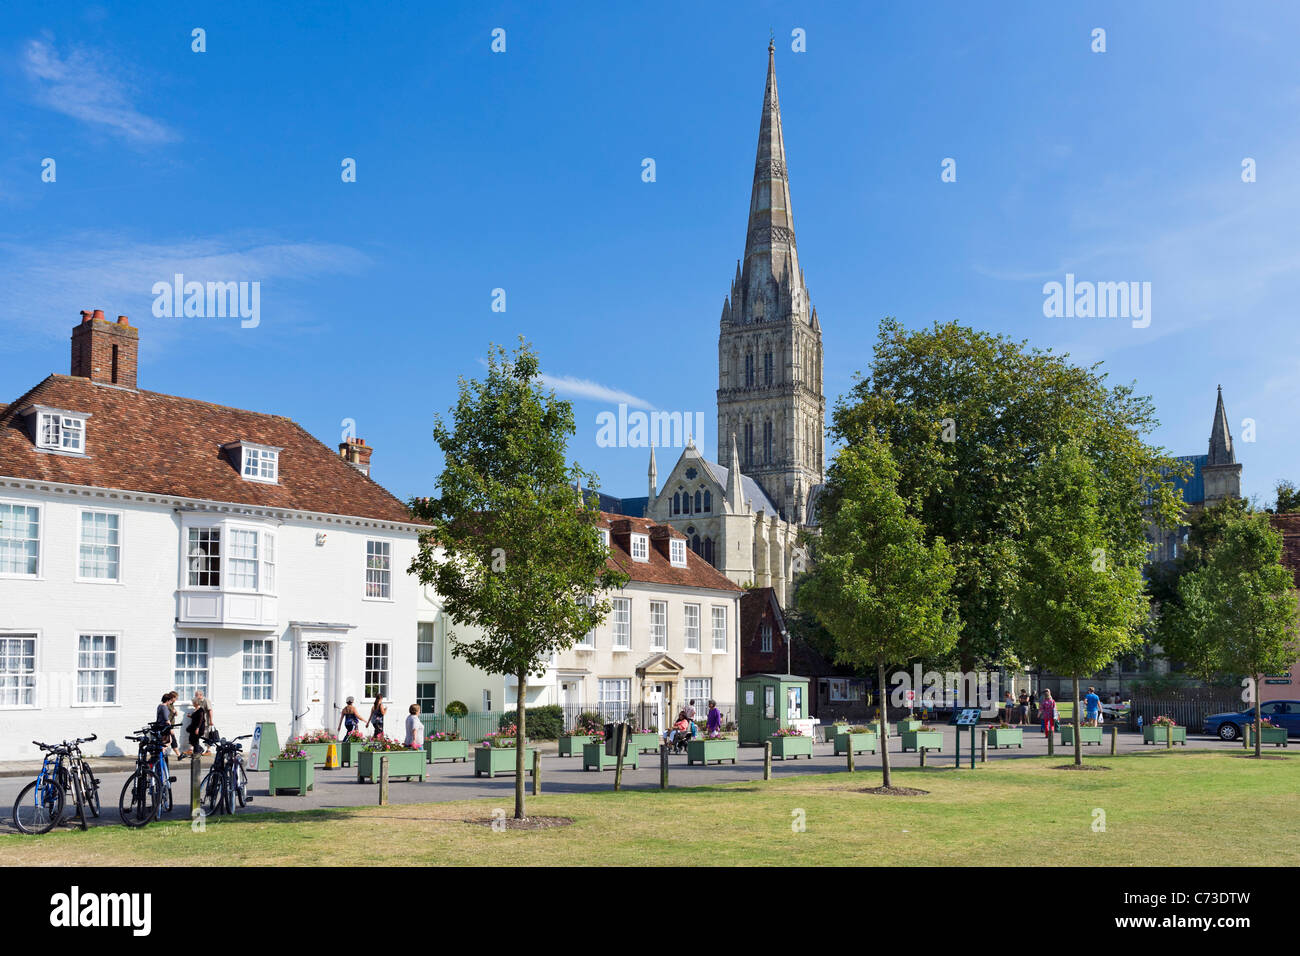 The spire of Salisbury Cathedral from Choristers Square, Salisbury, Wiltshire, England, UK Stock Photo